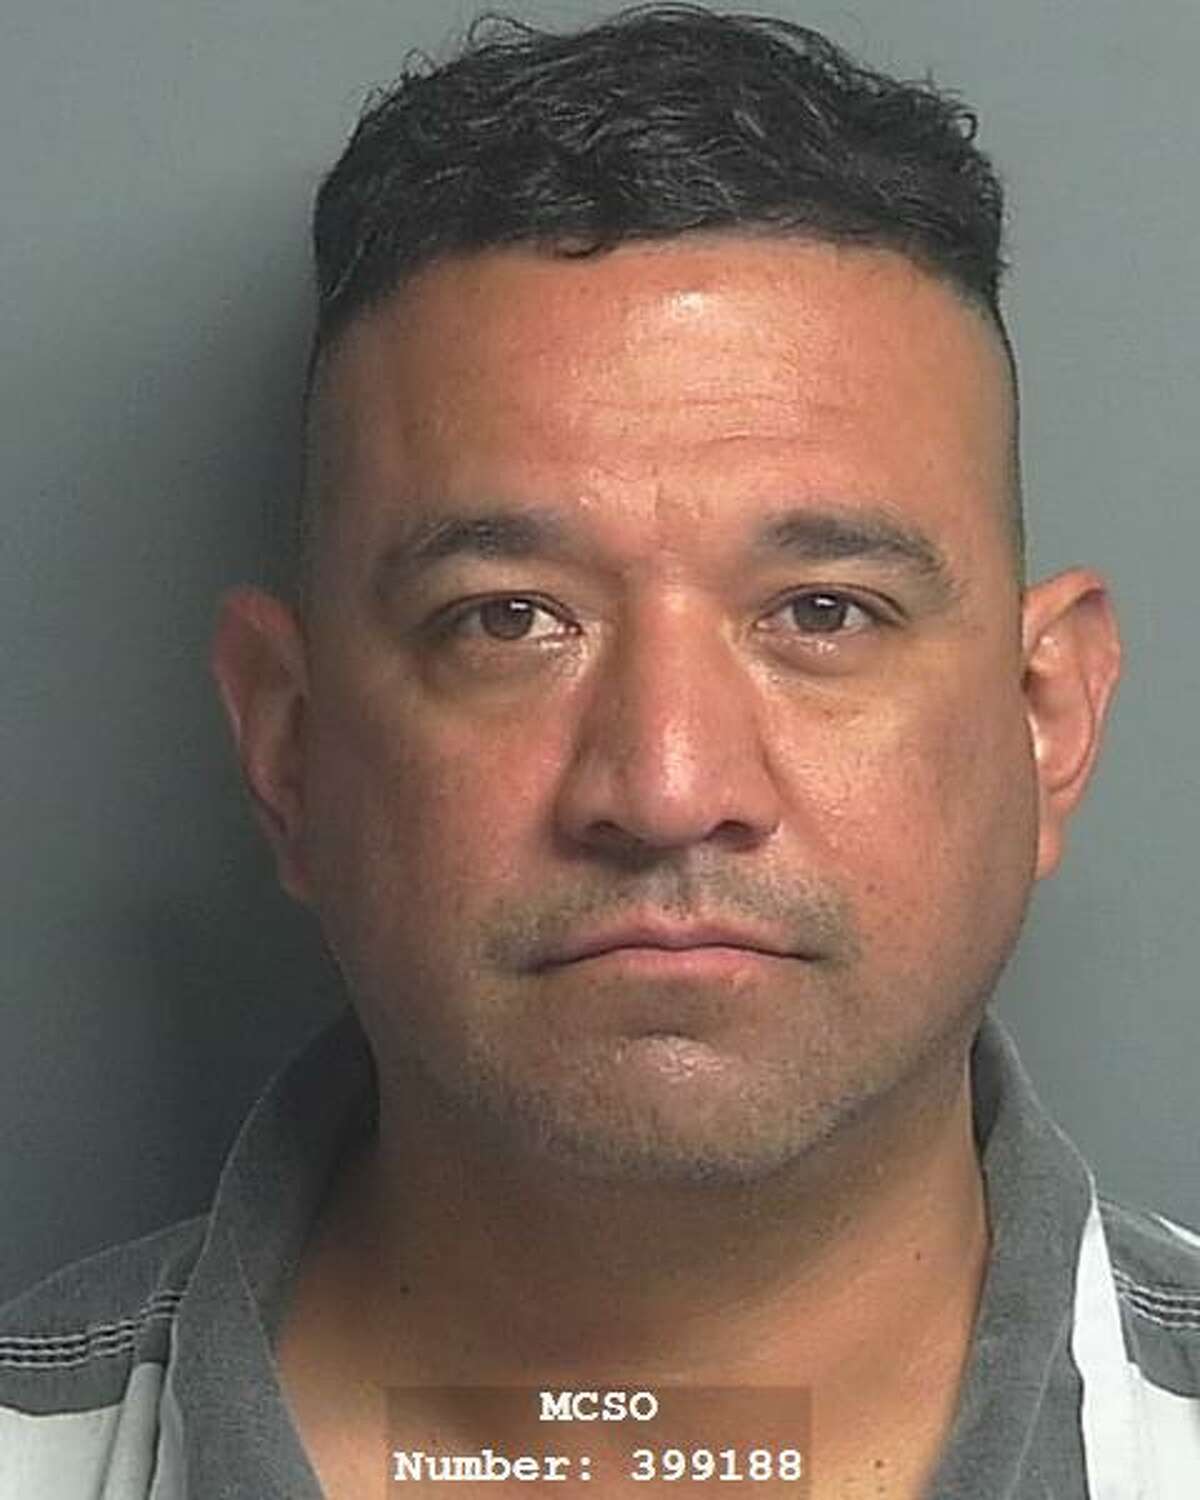 Frank Rosas, 47, is being charged with promotion or possession of child pornography, a third-degree felony,